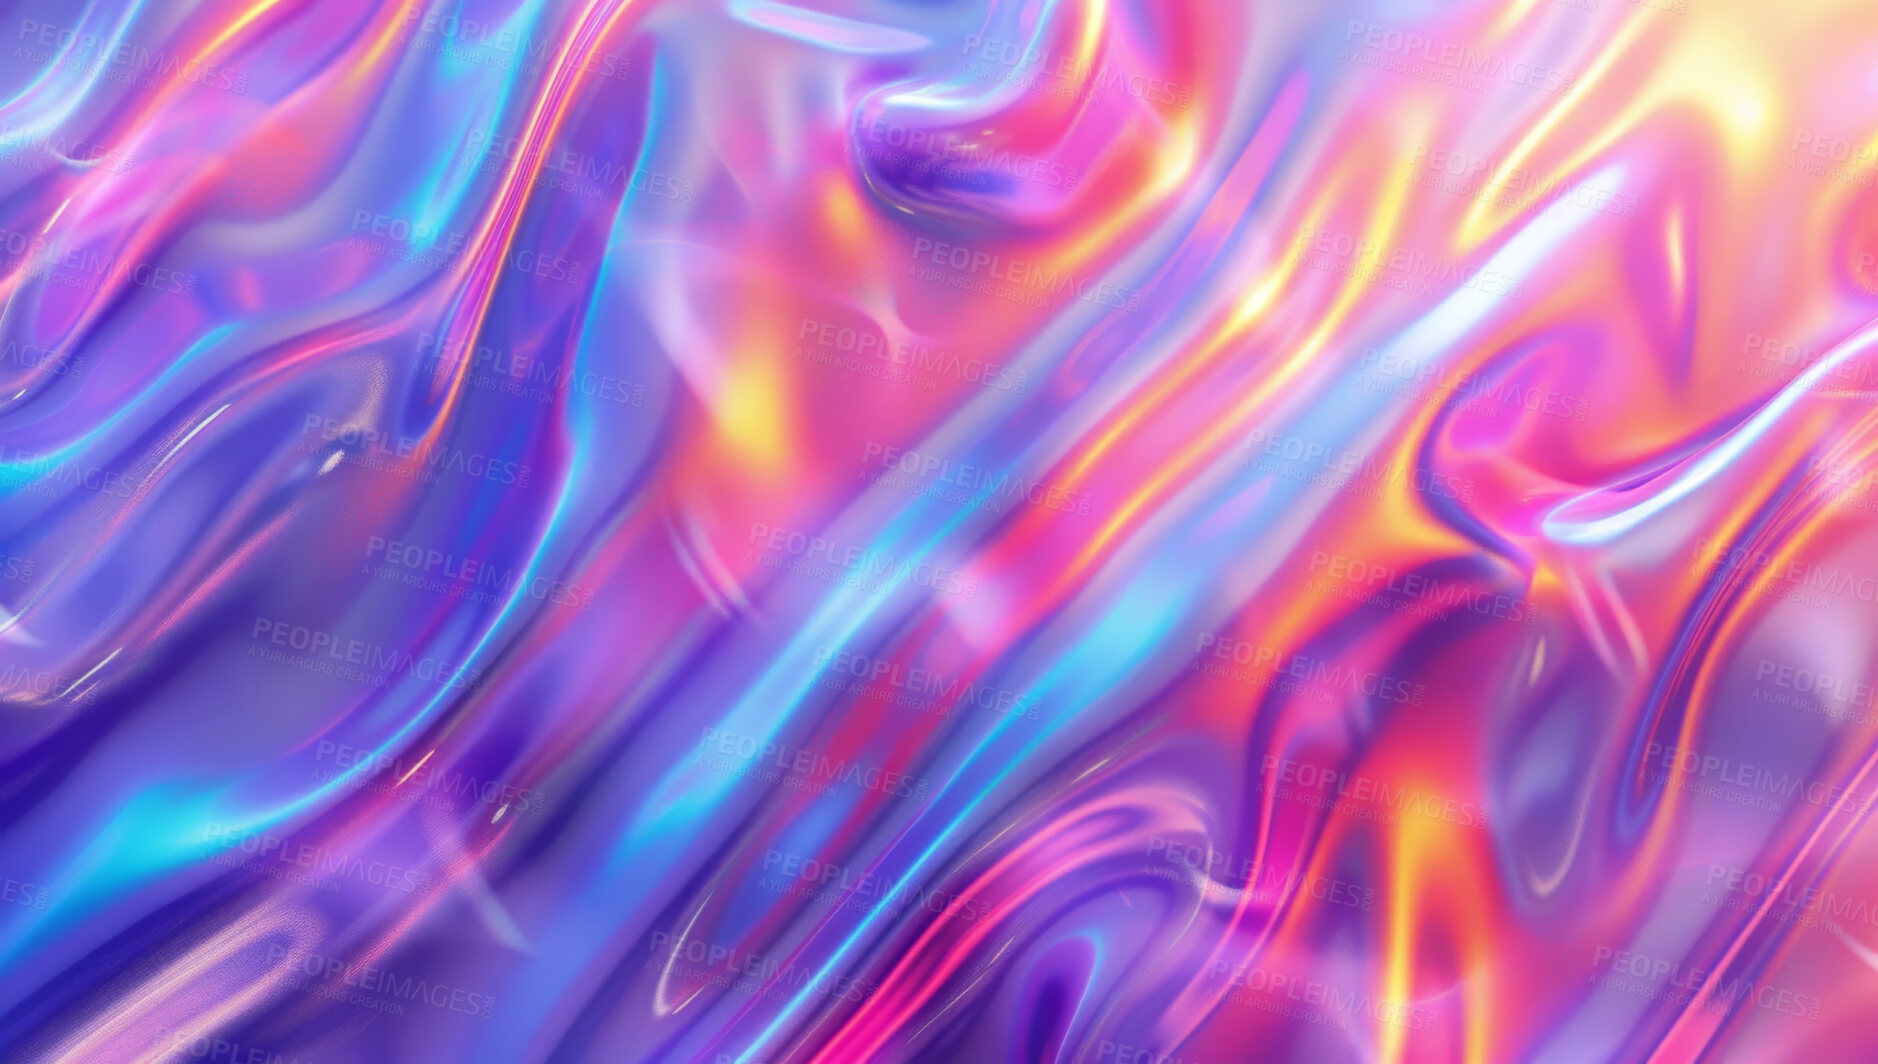 Buy stock photo Holographic, colorful and art wallpaper with metallic waves for abstract background, chrome or creative. Gradient, illustration and glowing neon or rainbow texture or pattern, designs or ultraviolet